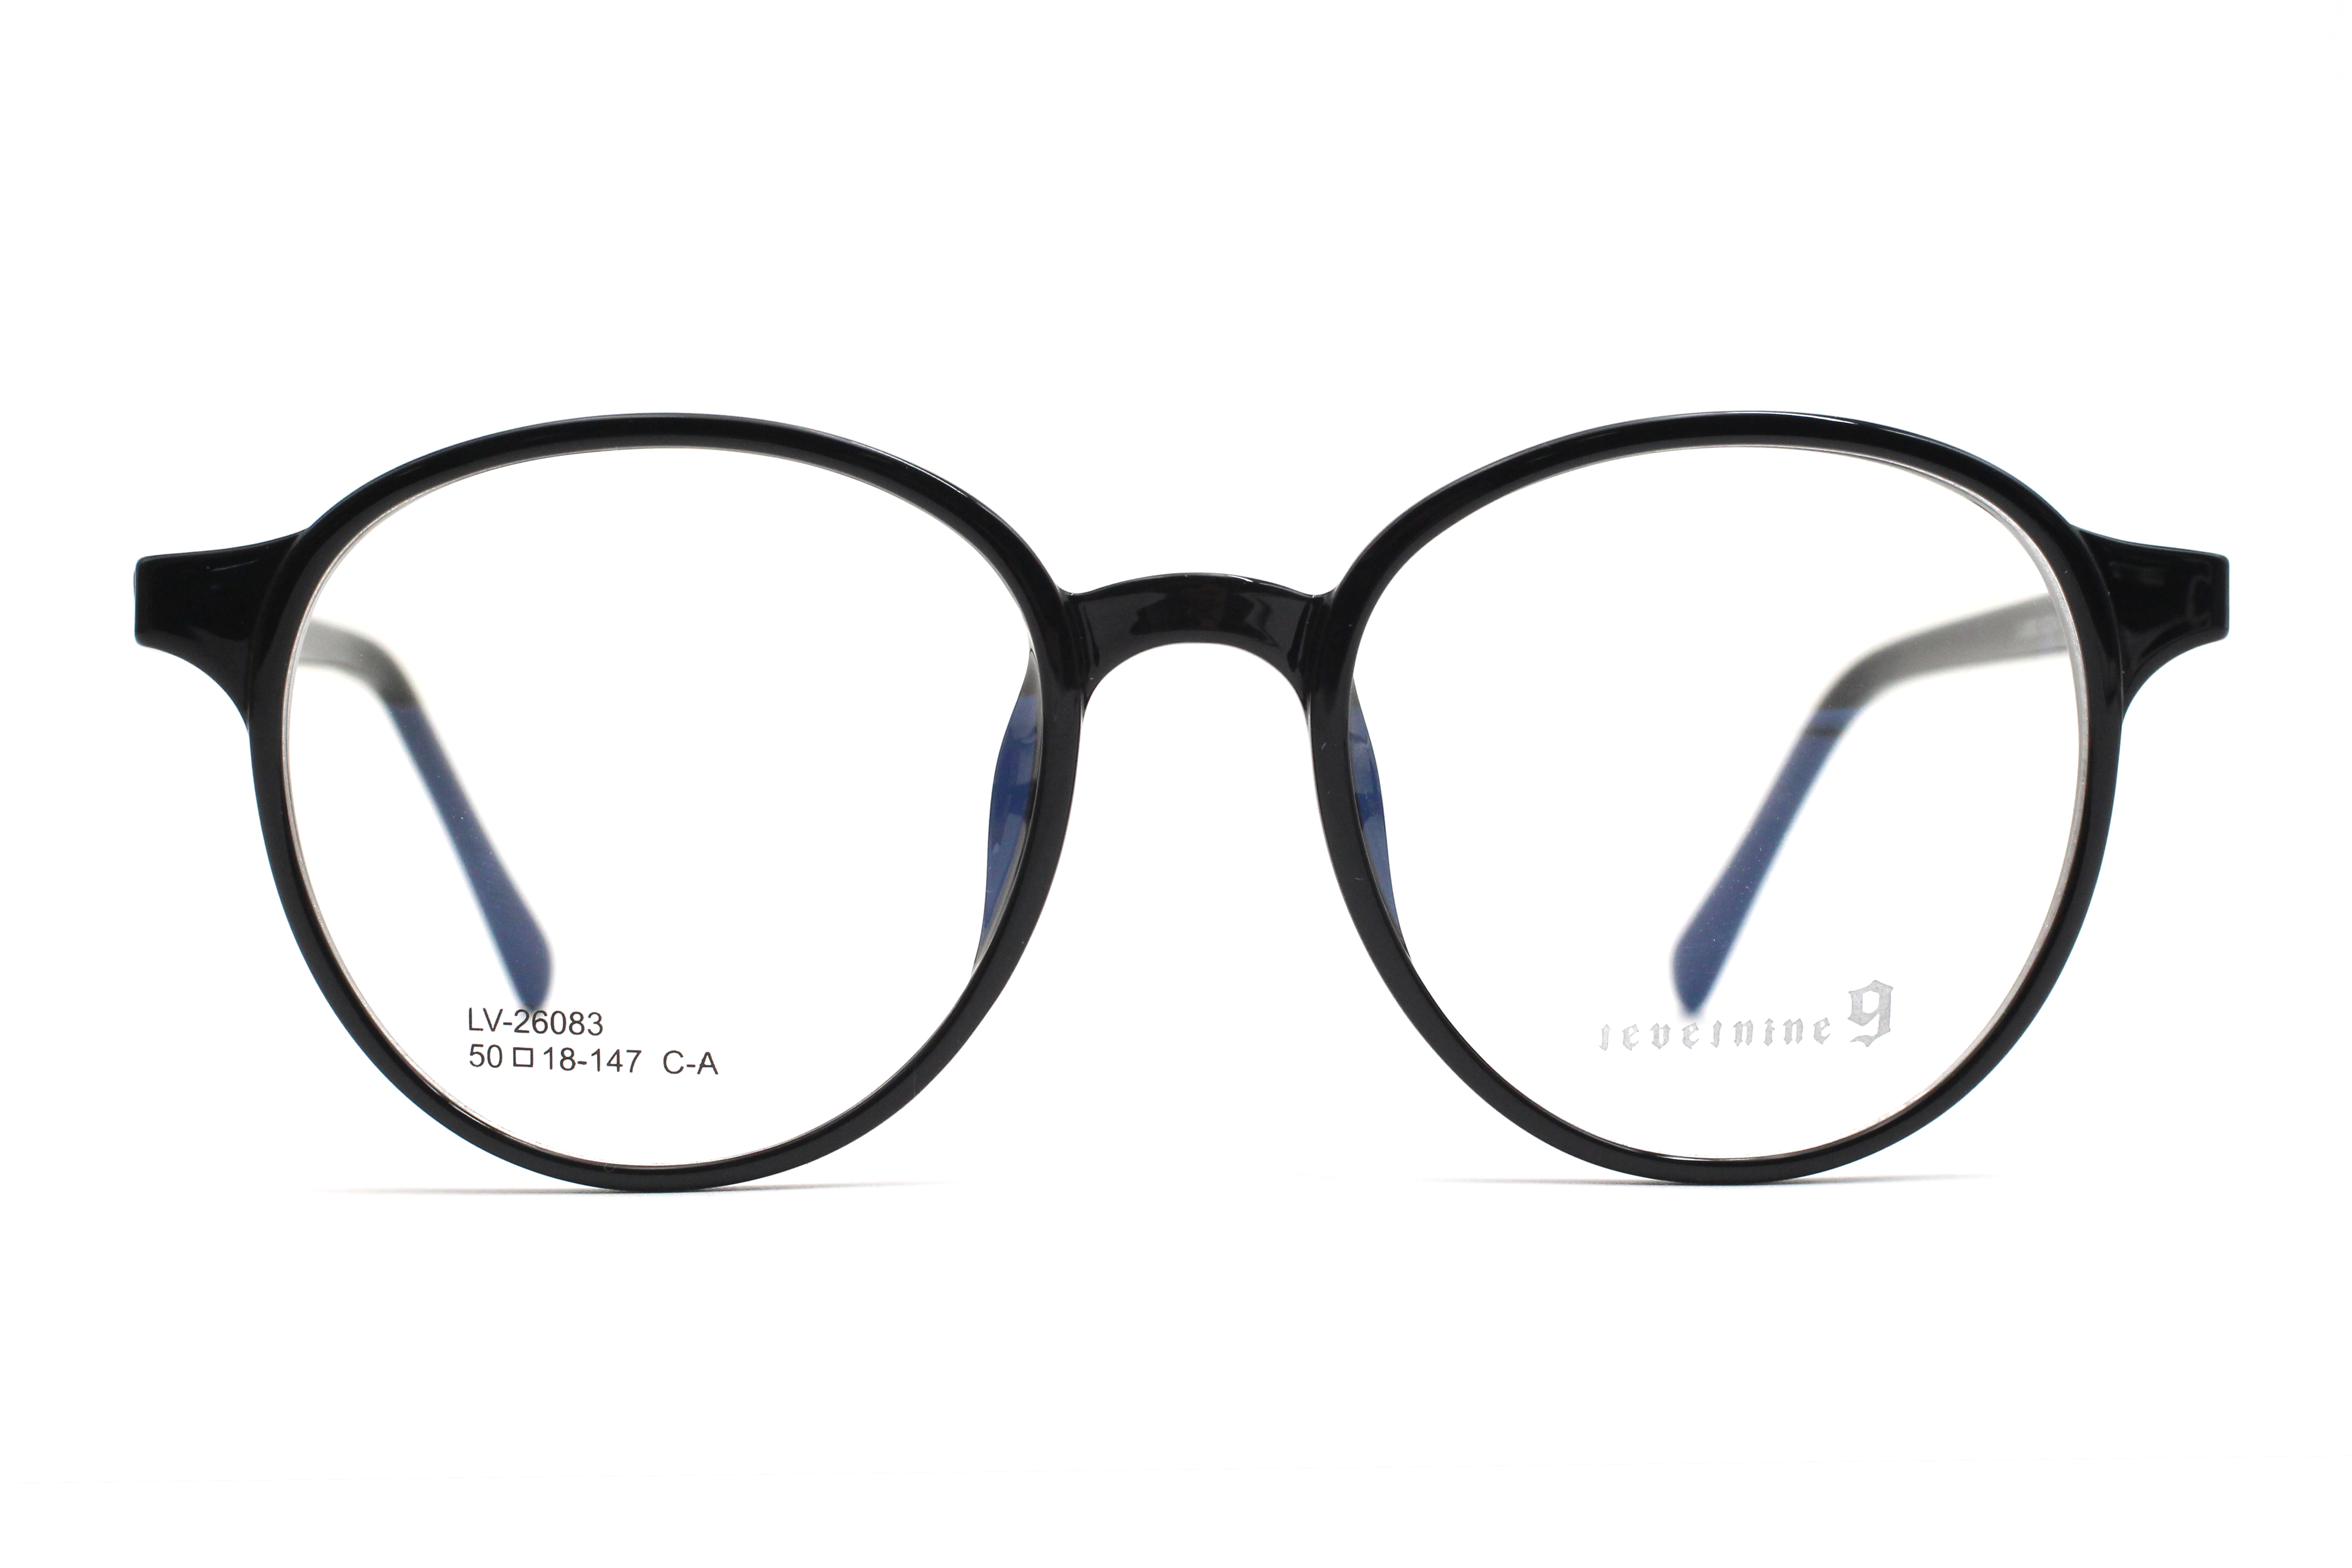 Tr Round Spectacles Frames 26083